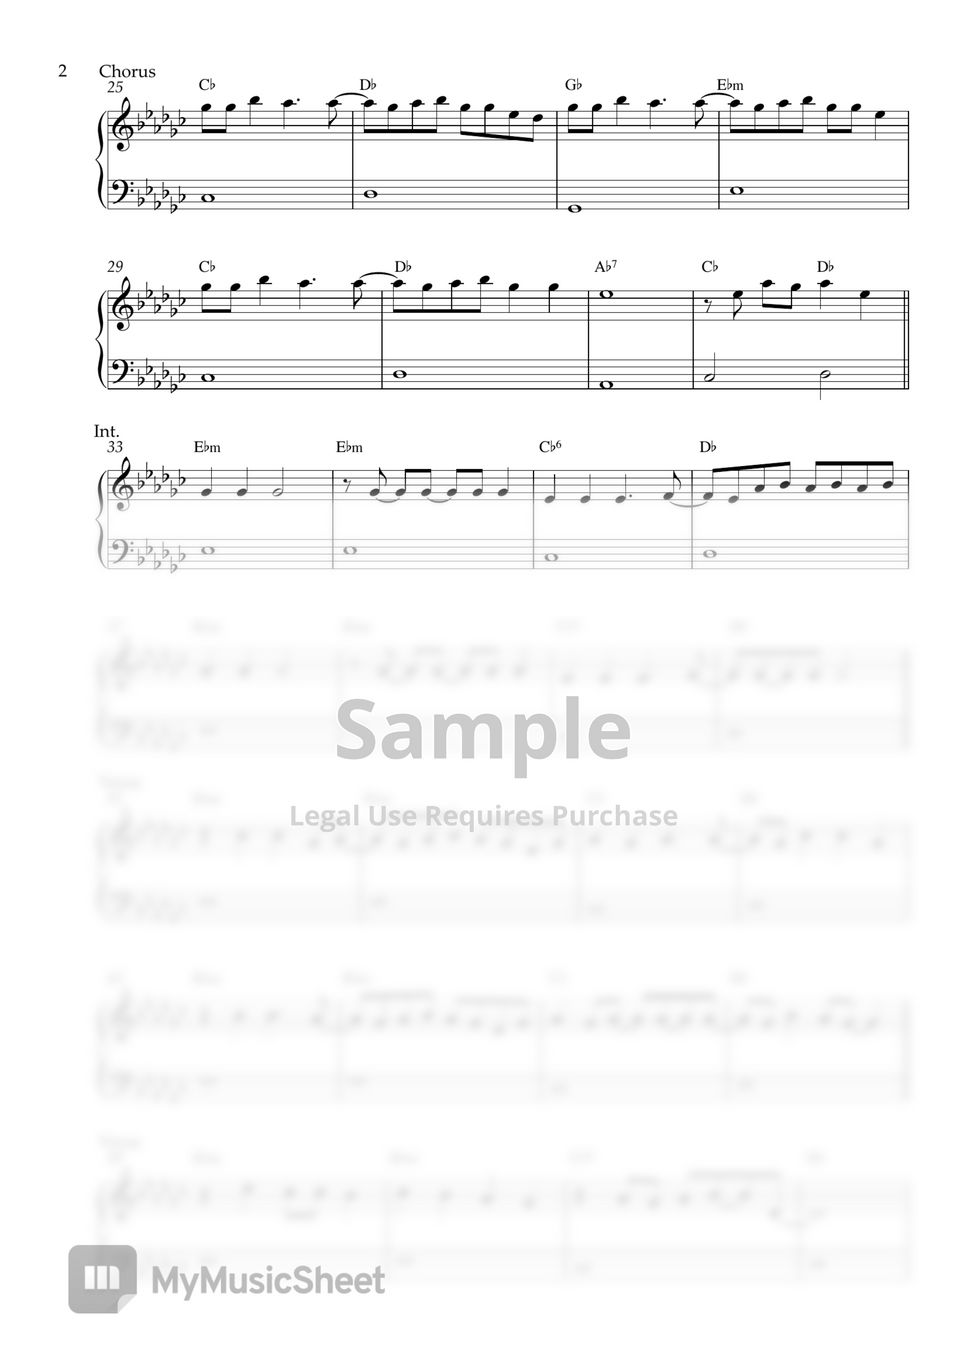 Taylor Swift - I Can See You (EASY PIANO SHEET) by Pianella Piano